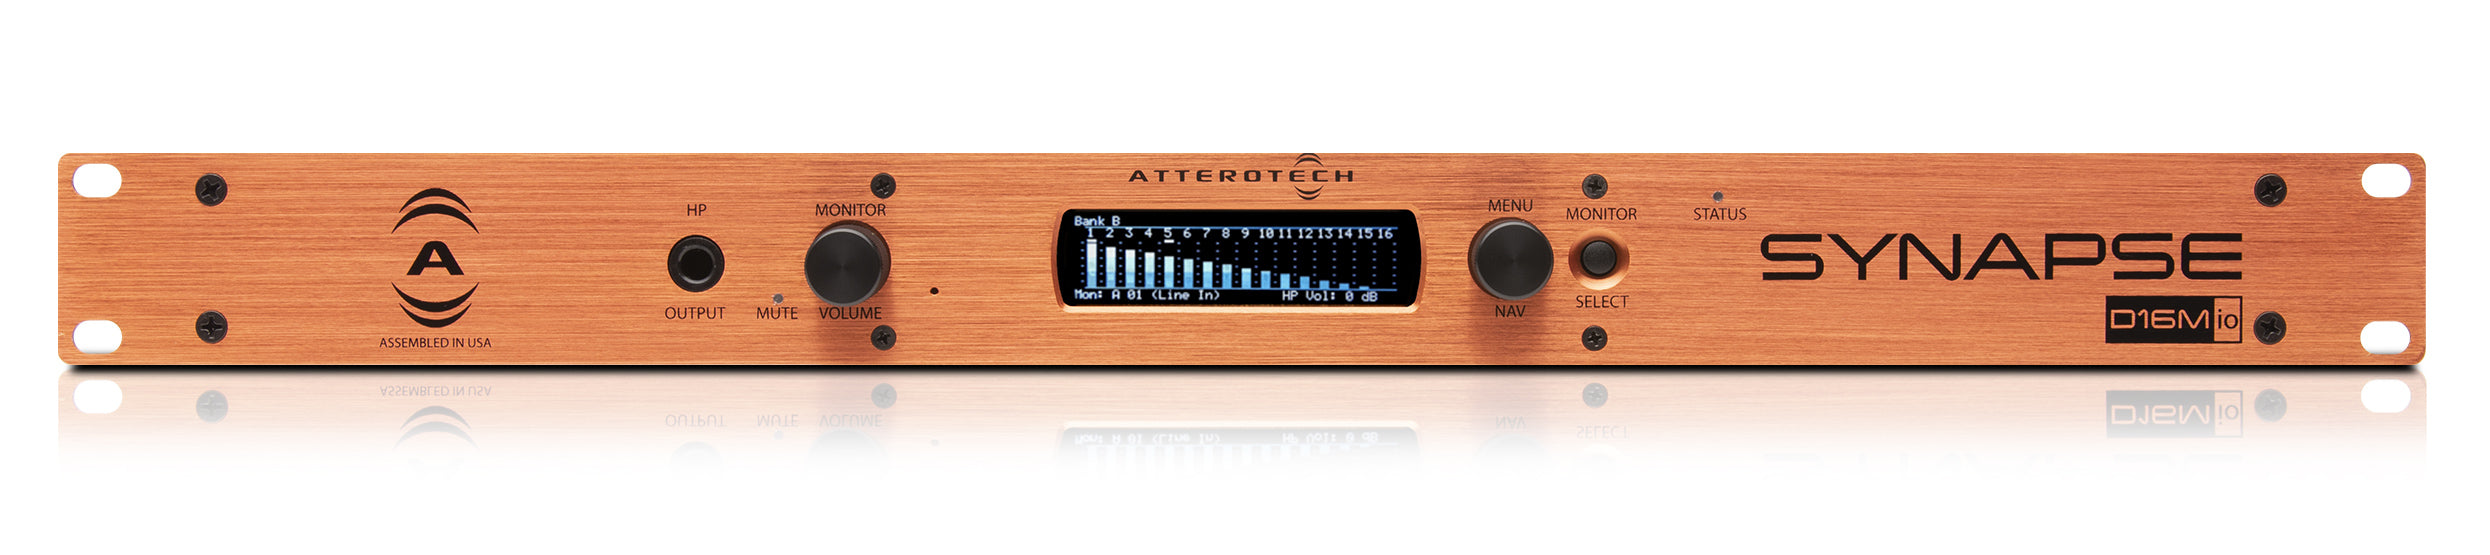 Attero Tech SYNAPSE-D16MIO 16 In/16 Out I/O Interface, 1RU